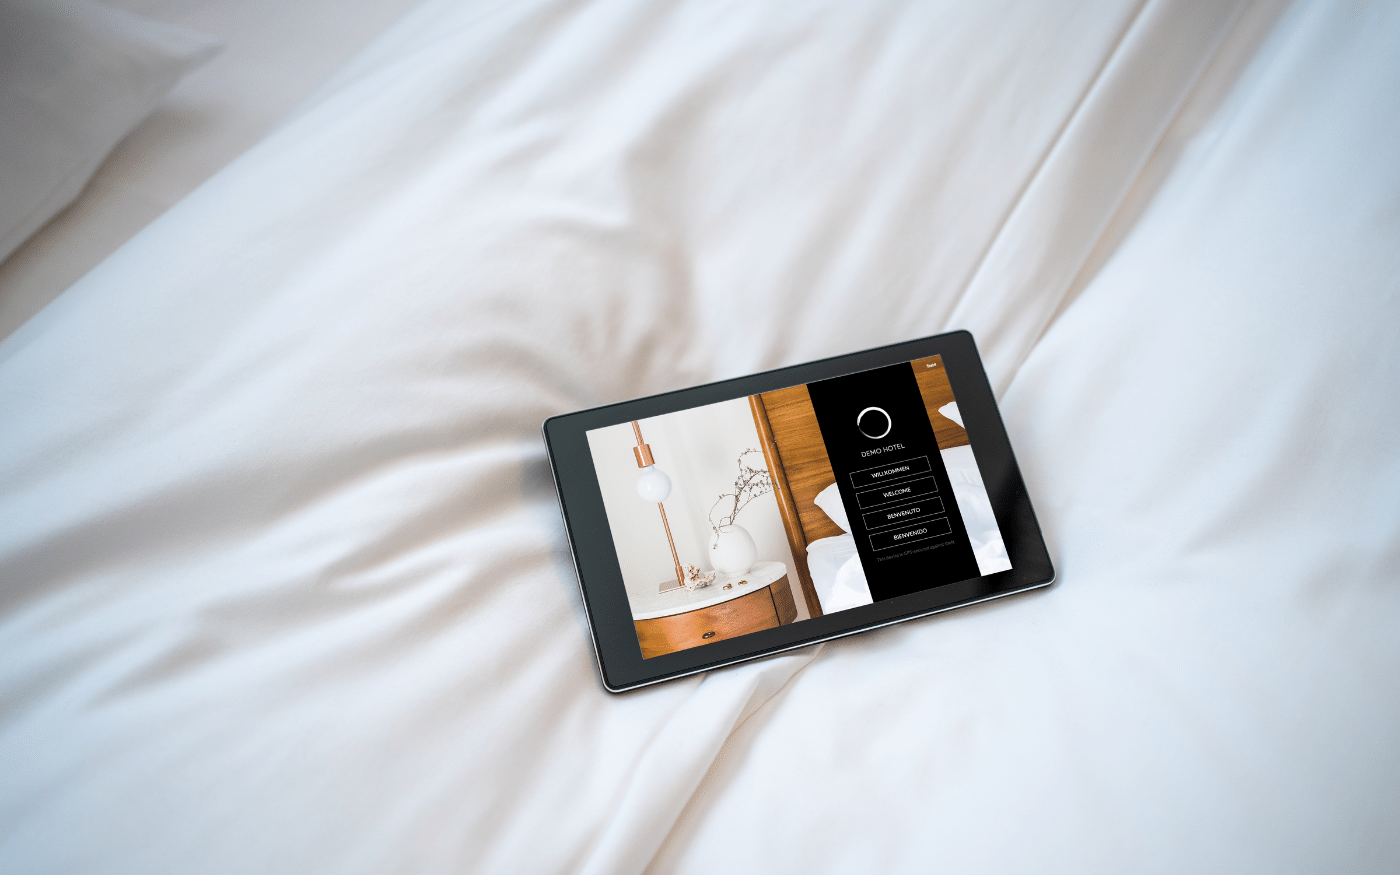 SuitePad tablet on white bed sheets